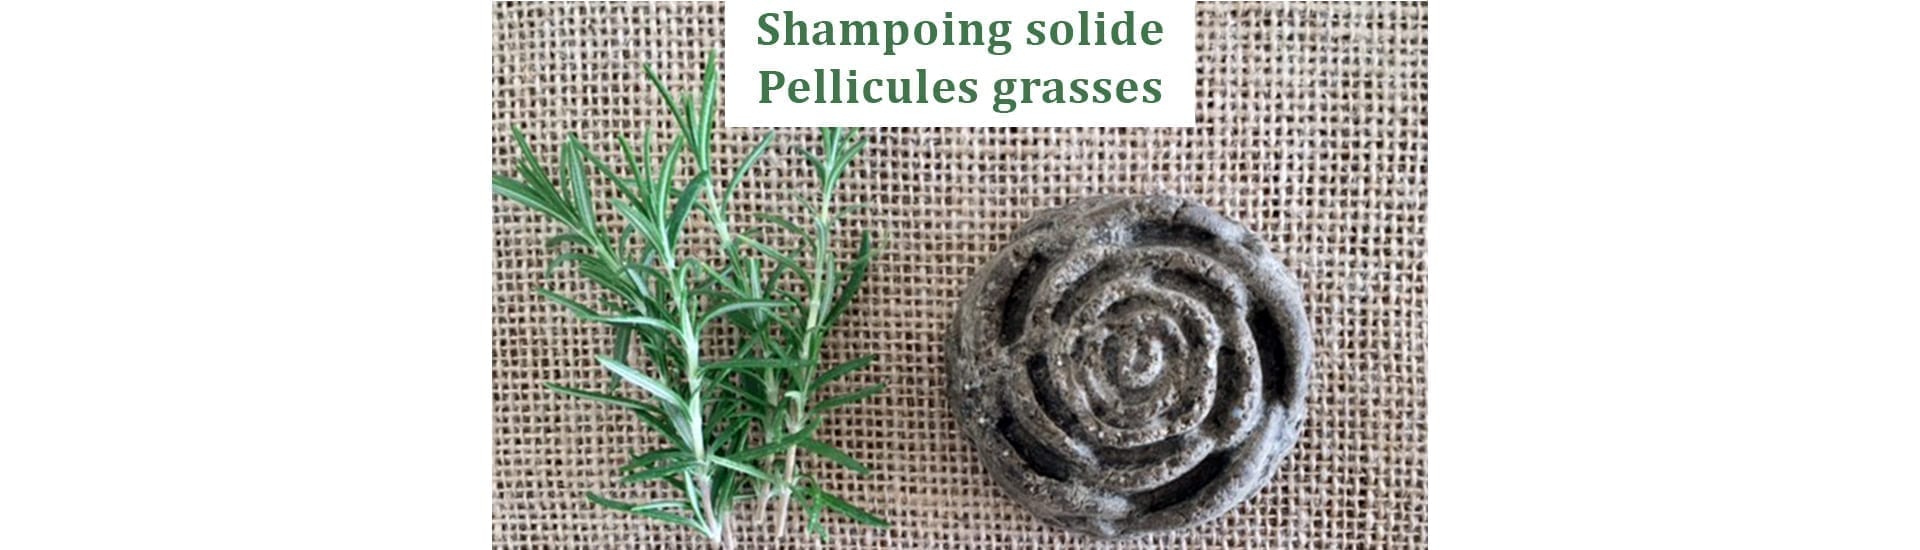 Shampoing solide contre les pellicules grasses